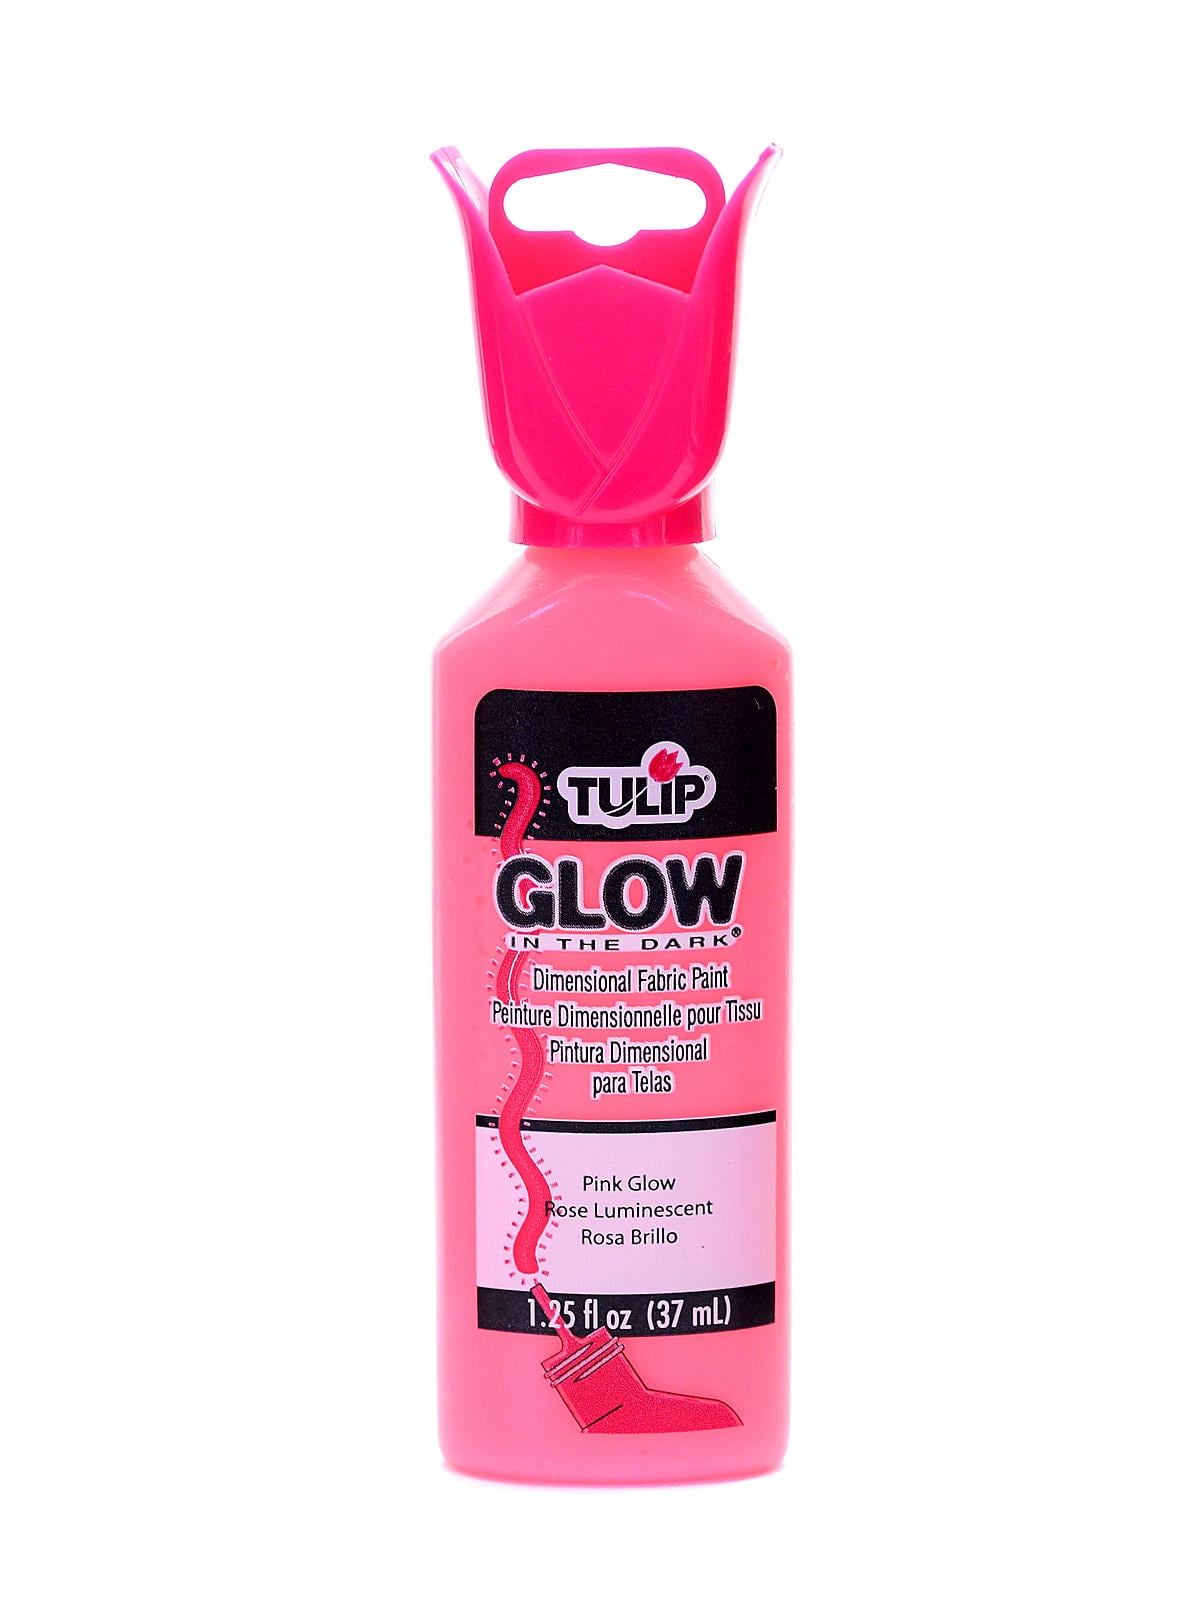 Glow in the Dark Dimensional Fabric Paint pink, 1 1/4 oz. (pack of 6)